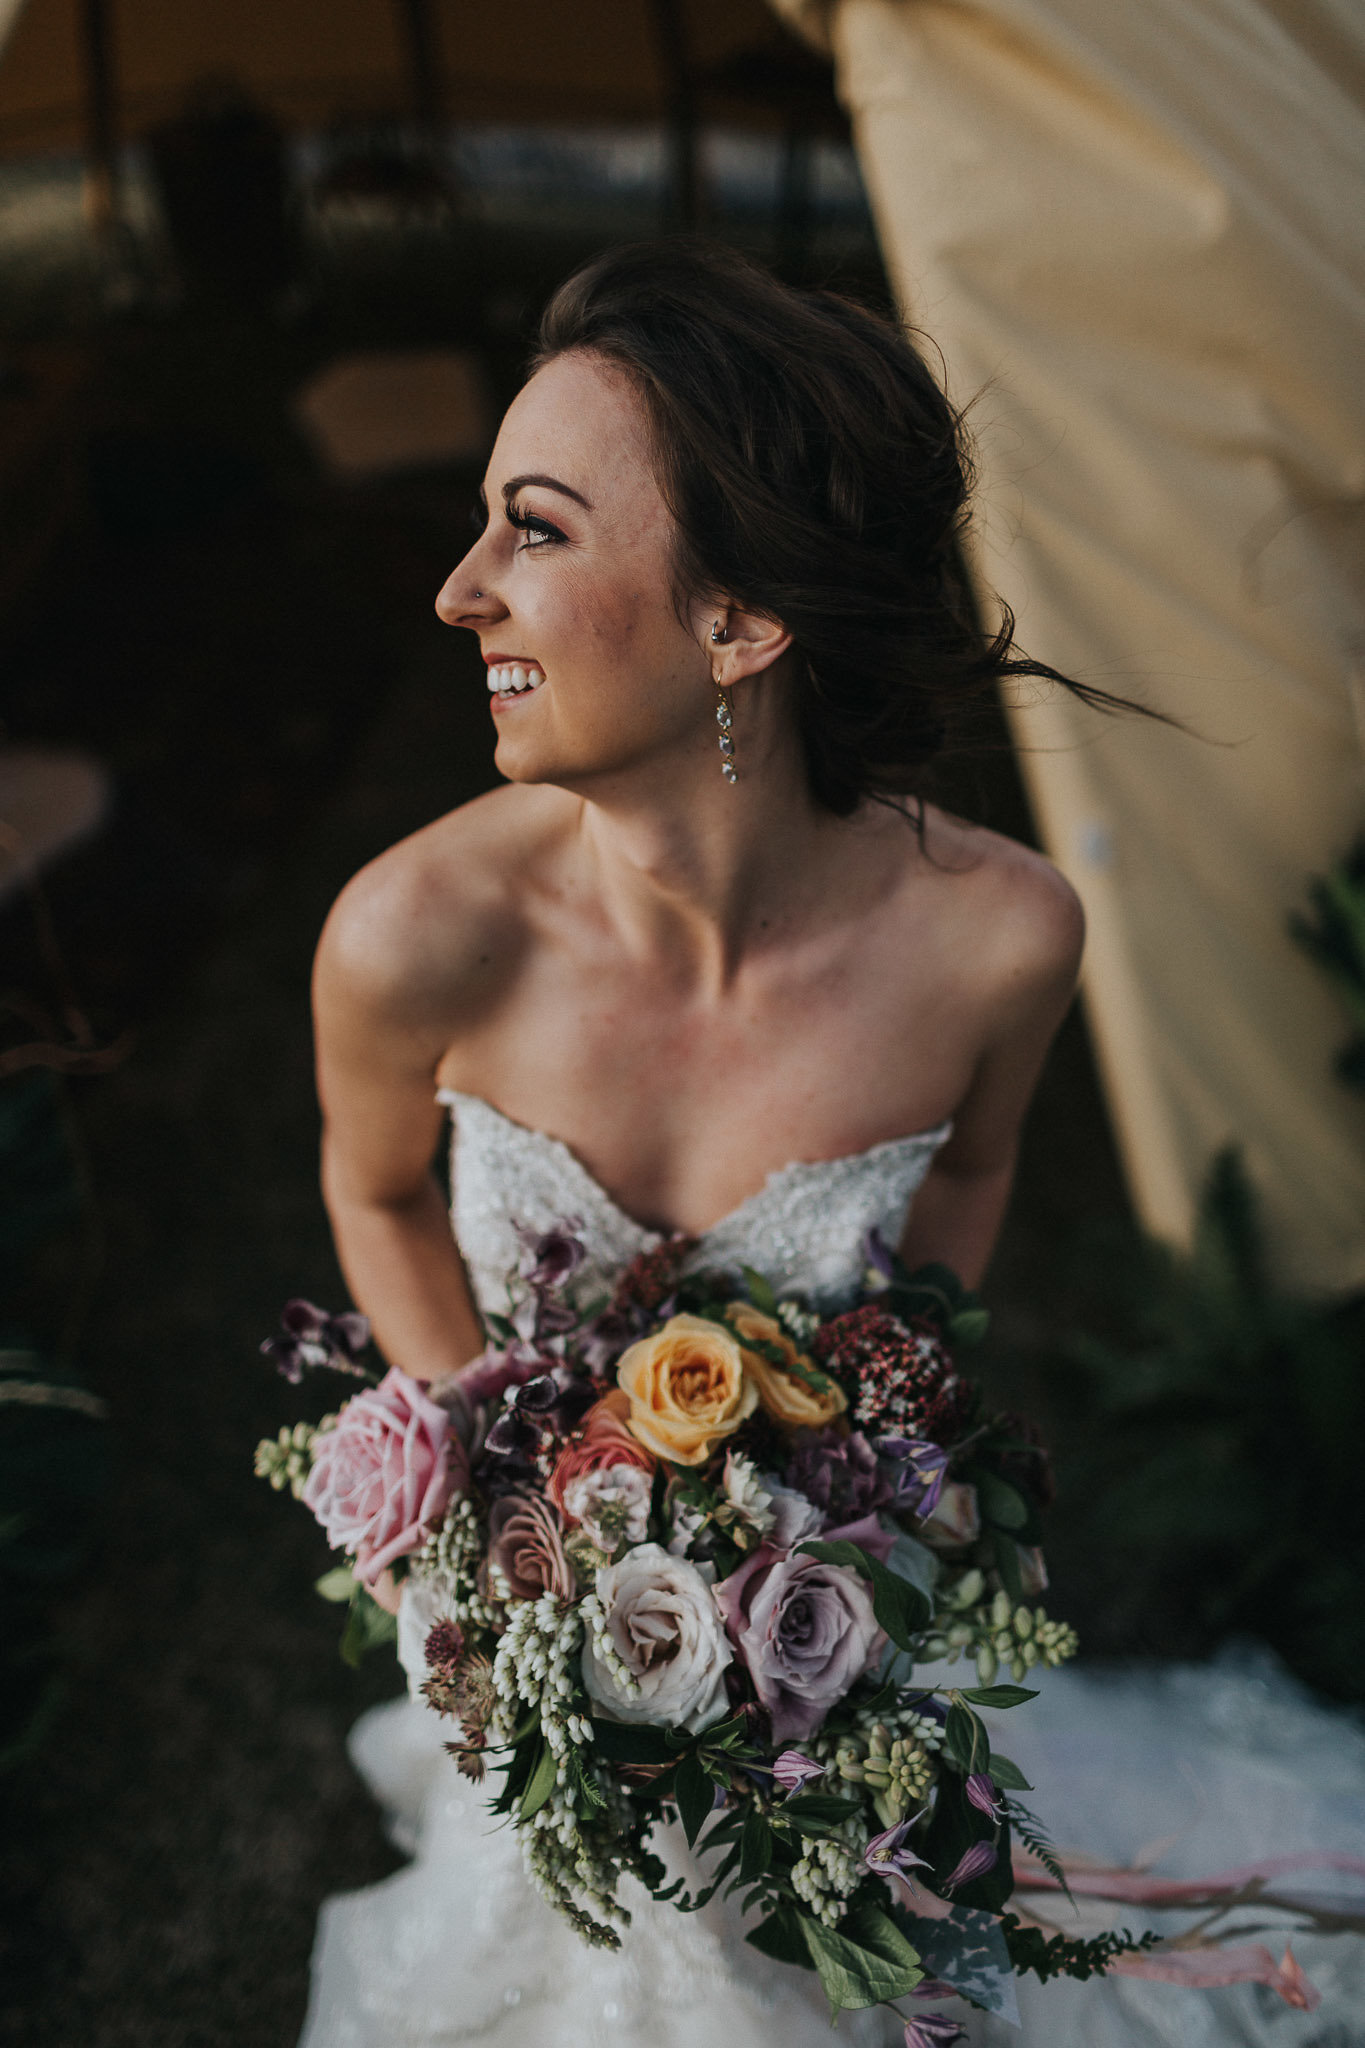 Eclectic Bohemian- An Early Spring Styled Shoot | summerrobbinsflowers.com